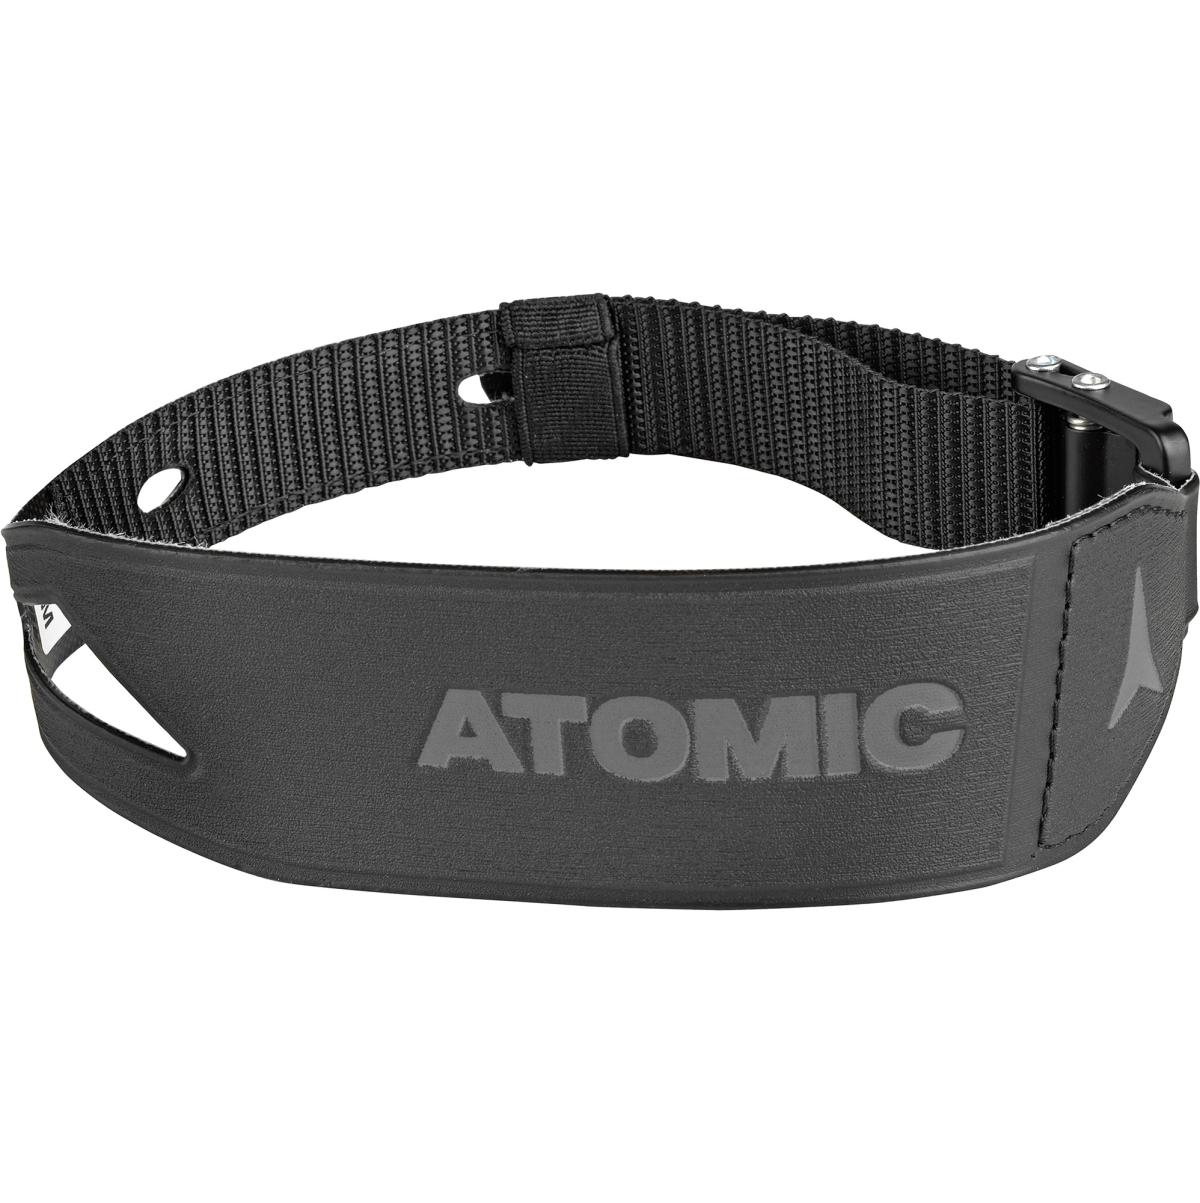 Atomic Buckle Strap Long 50mm